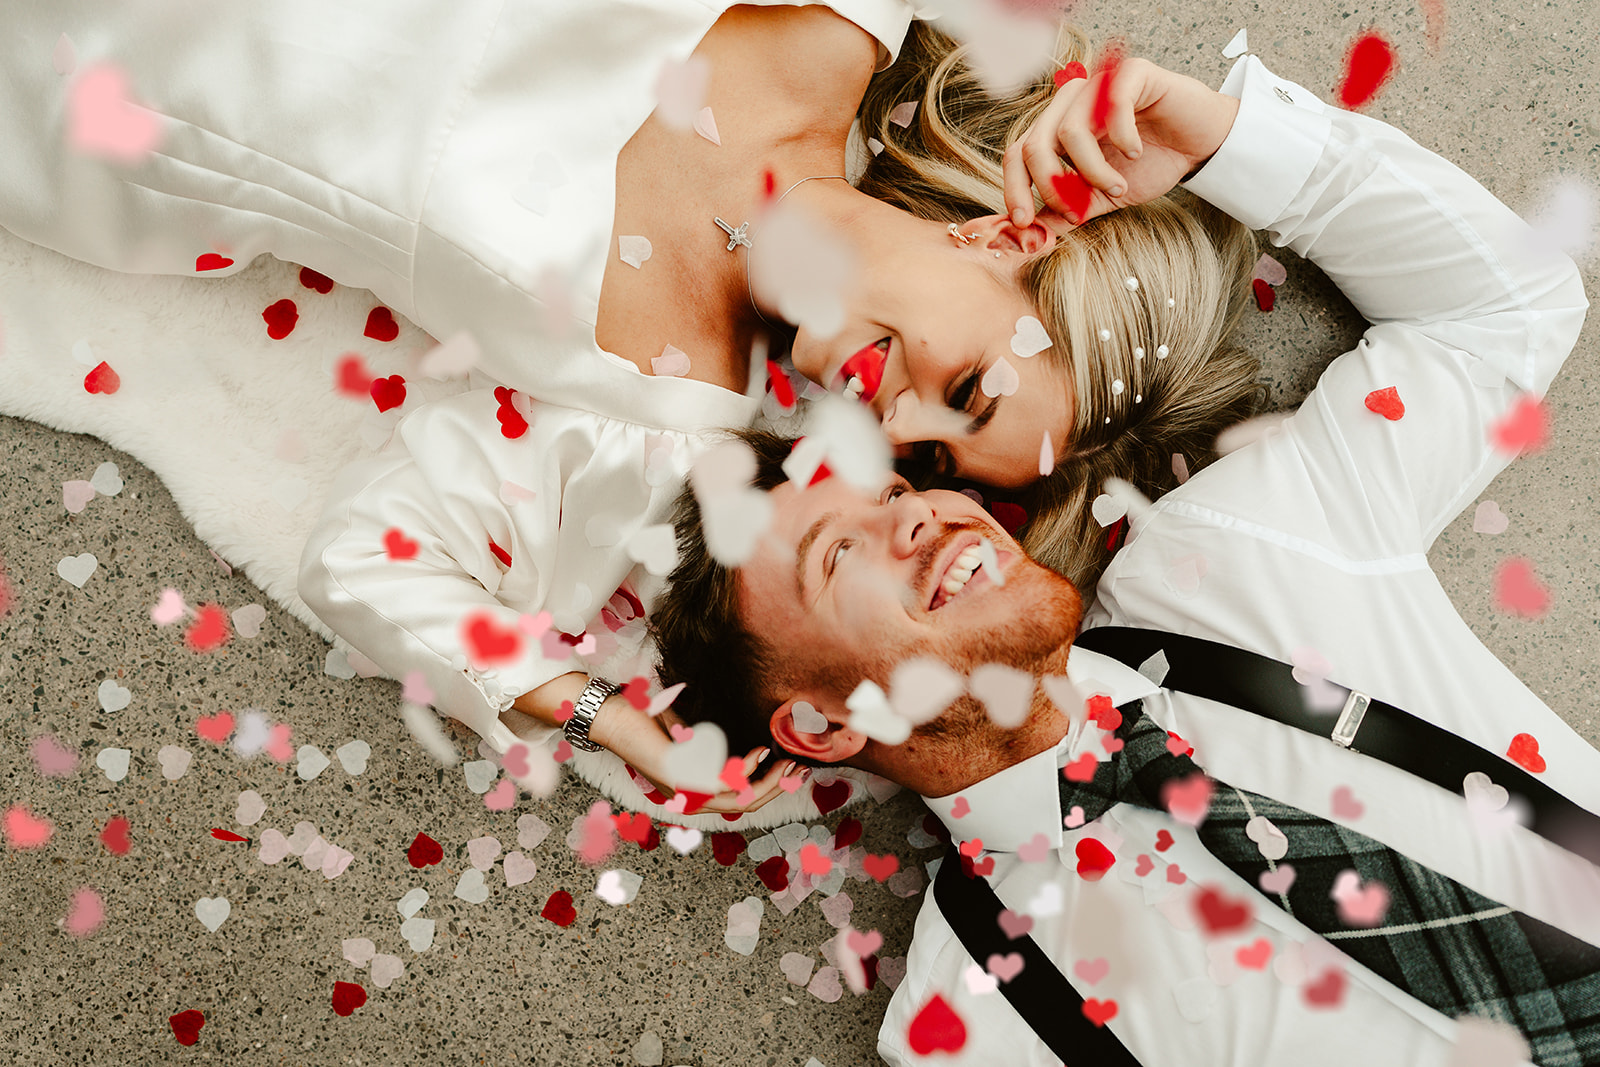 pink and red confetti falls on bride and groom photo taken from above as they lie on the floor